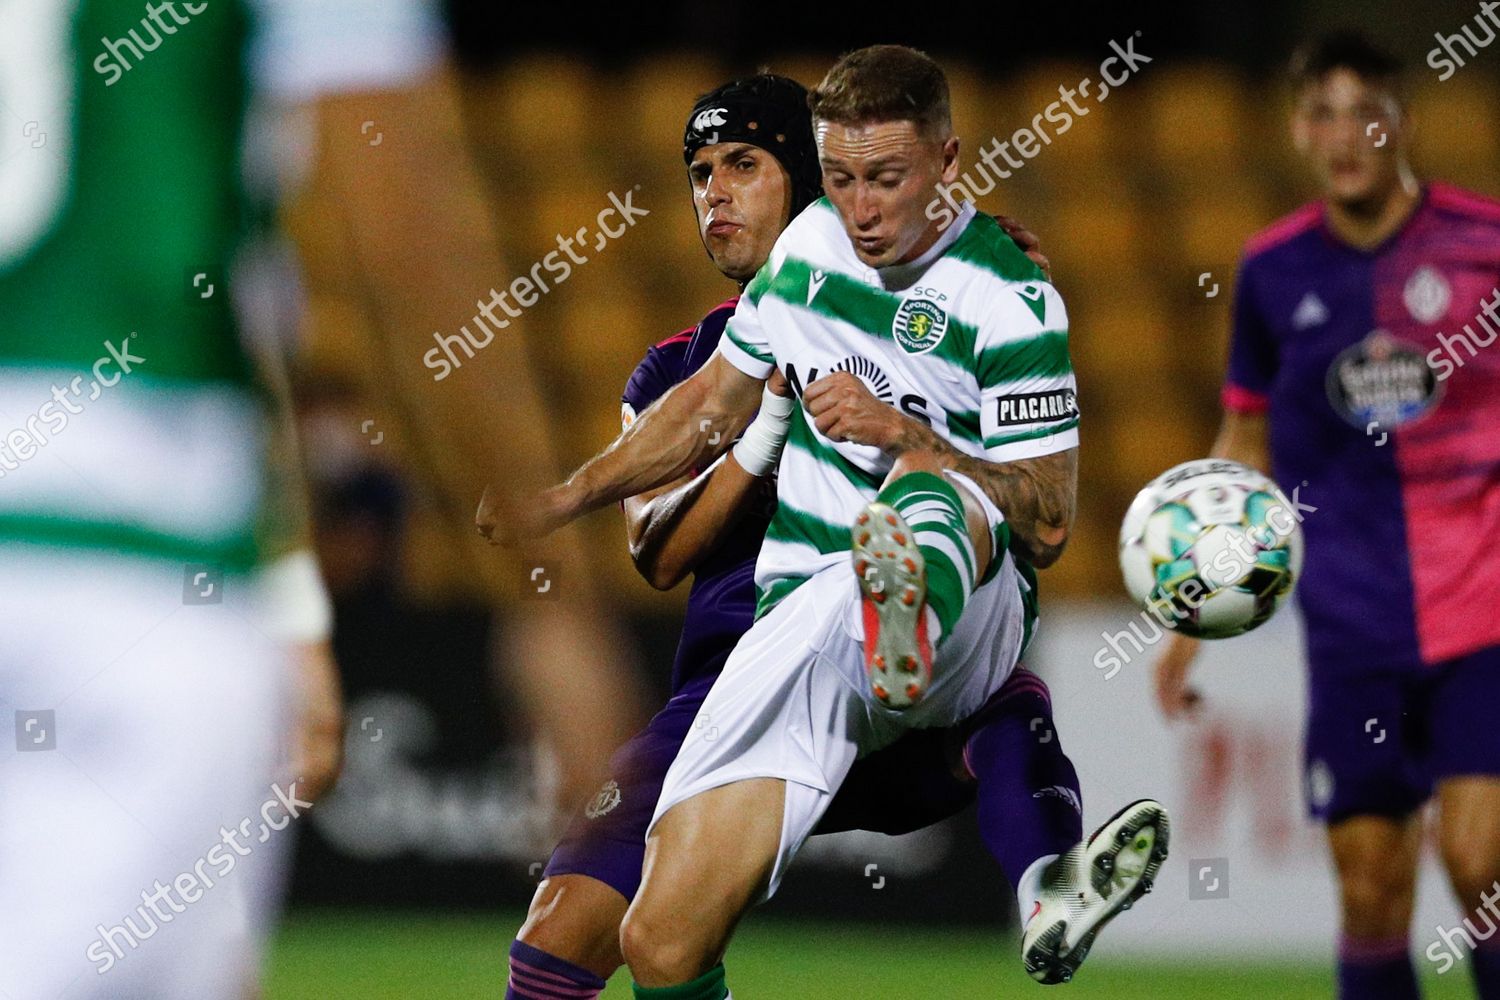 Nuno Santos R Sporting Cp Action Against Editorial Stock Photo Stock Image Shutterstock